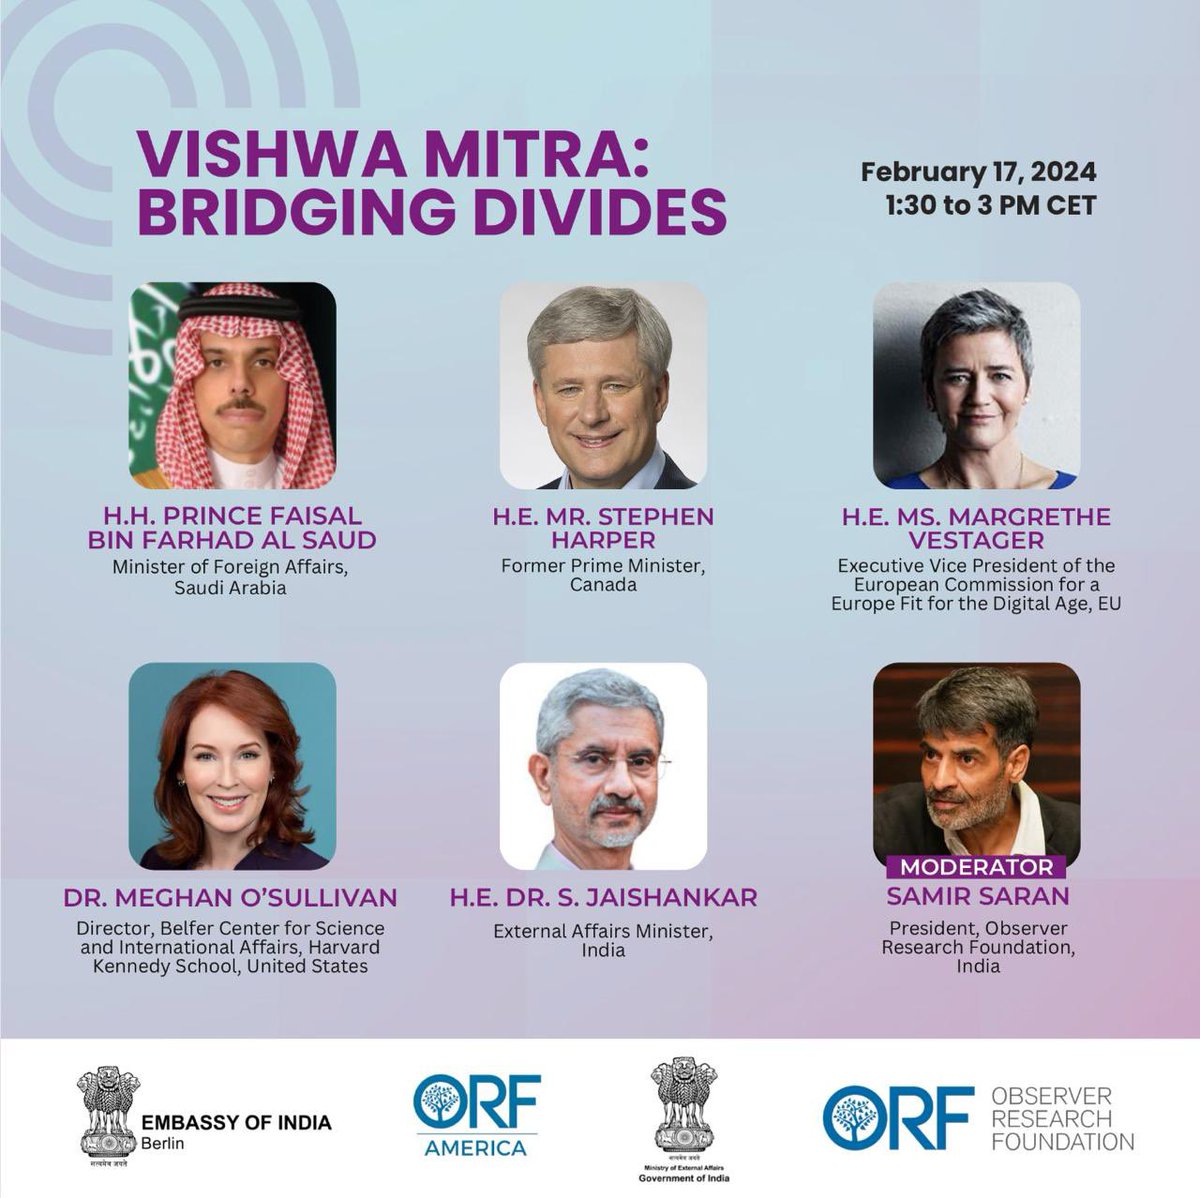 Delighted to announce our ministerial lunch discussion at @MunSecConf - Vishwa Mitra: Bridging Divides.

🗓️ Feb 17 | 1:30-3 PM CET

With @DrSJaishankar, HH @FaisalbinFarhan, PM @stephenharper, EVP @vestager and Dr @OSullivanMeghan. 

@orfonline @MEAIndia @eoiberlin @ORFAmerica